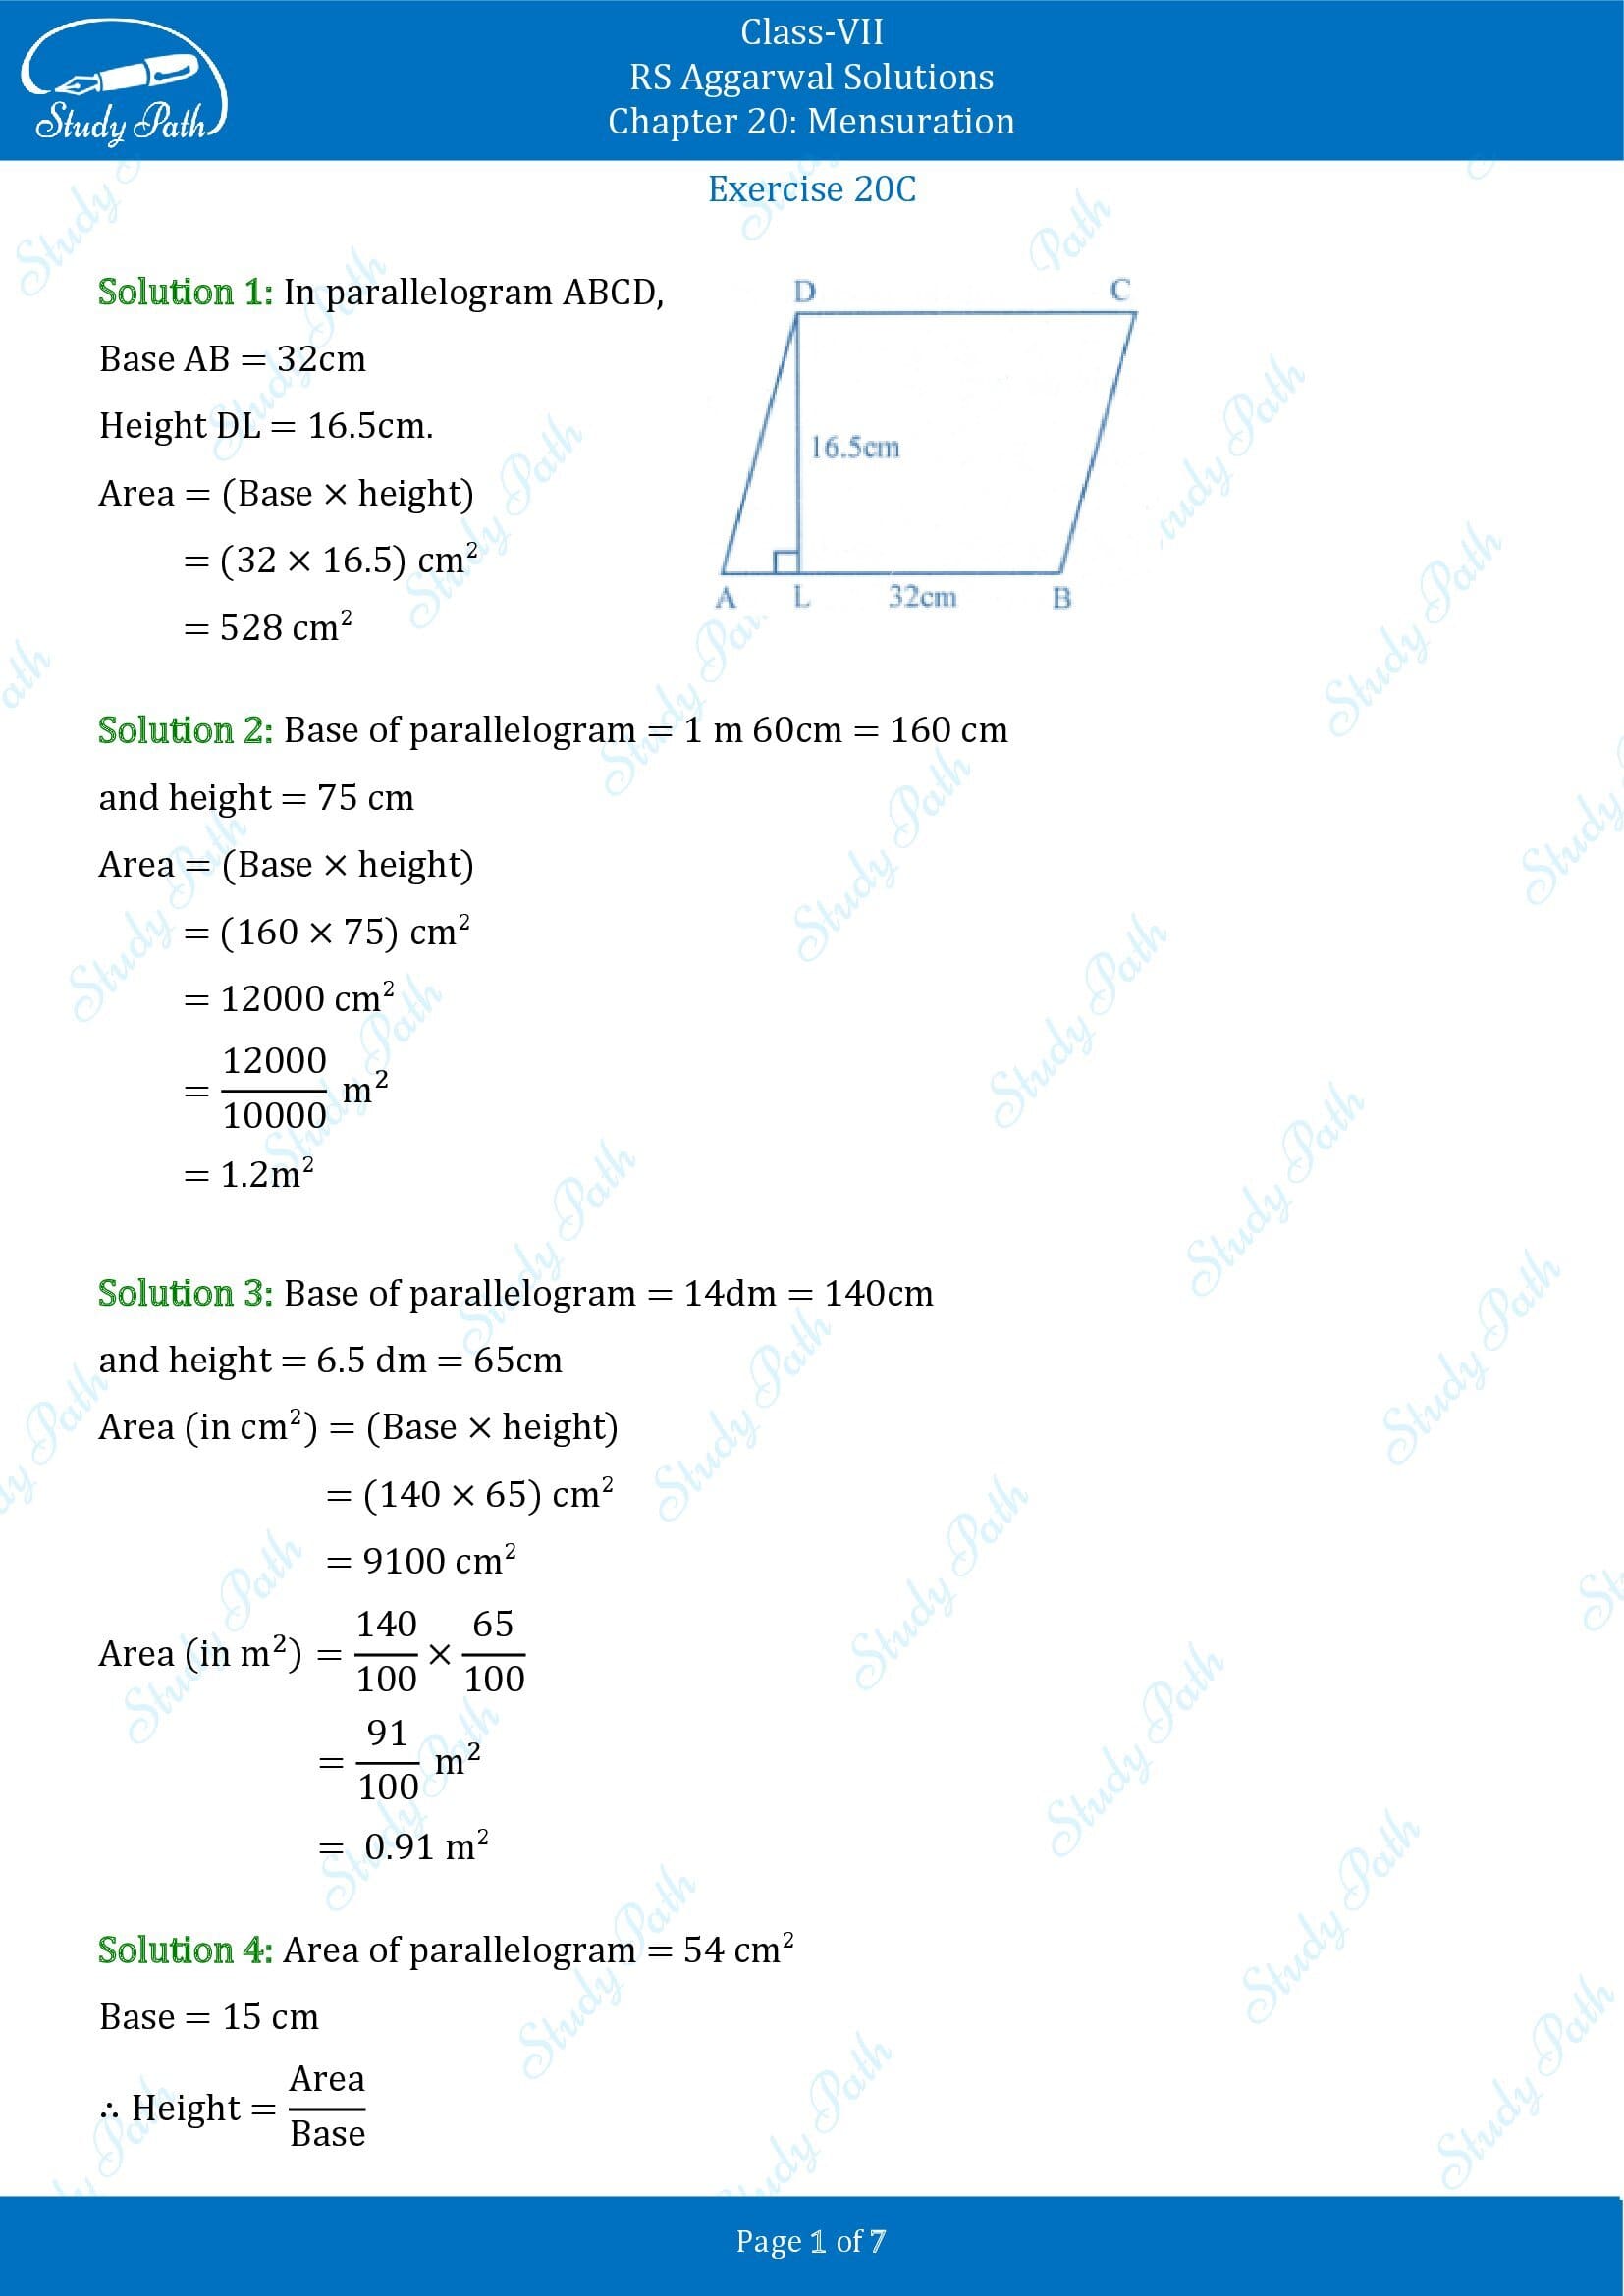 RS Aggarwal Solutions Class 7 Chapter 20 Mensuration Exercise 20C 00001